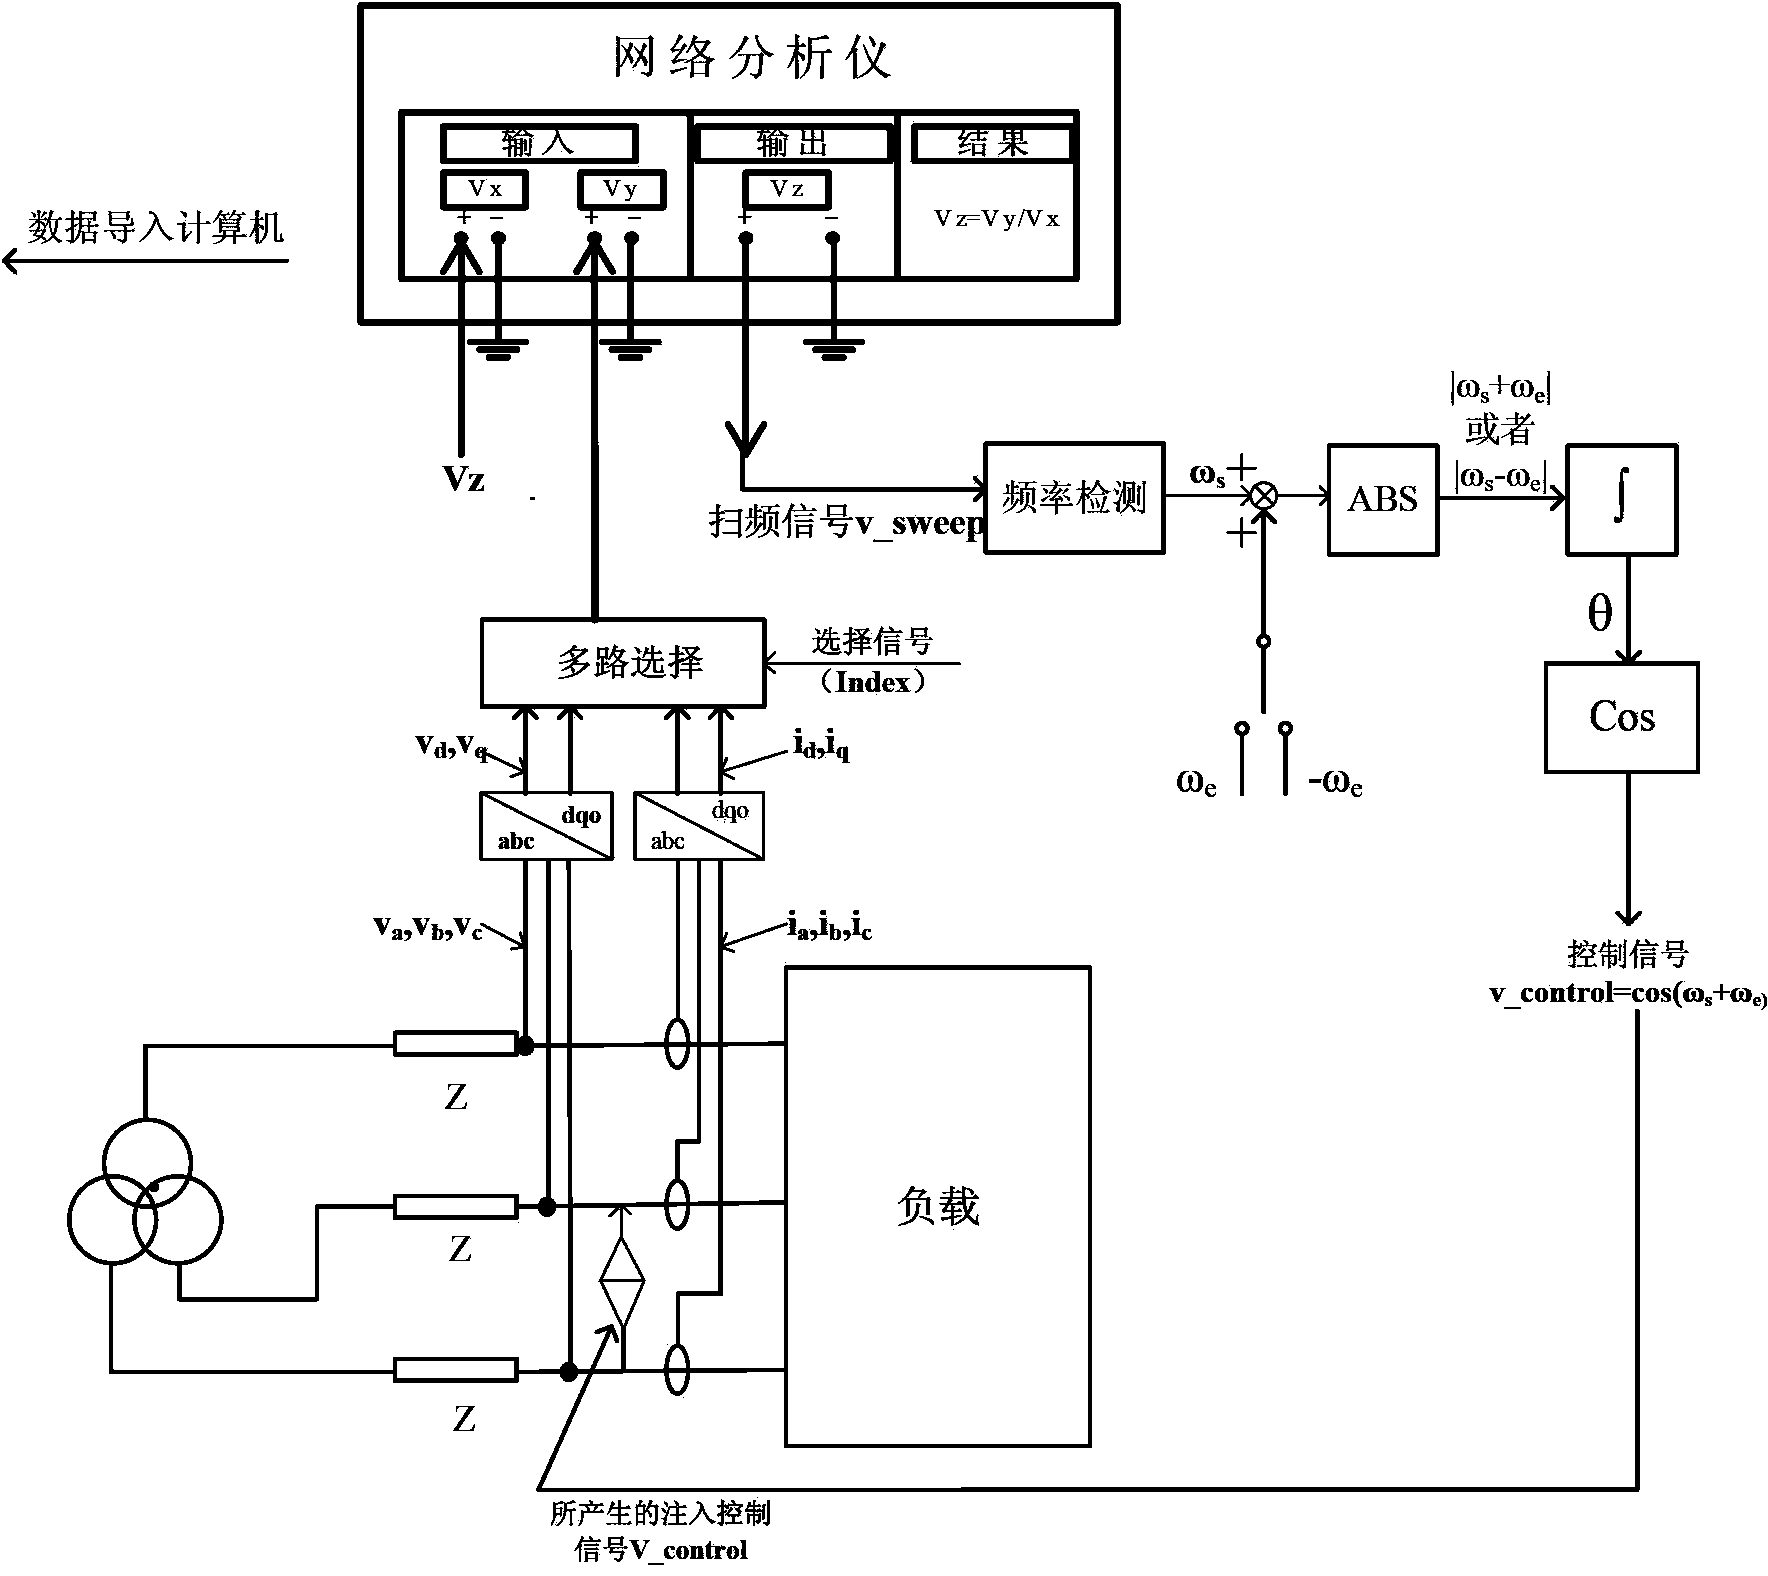 Impedance measurement method of three-phase alternating current system